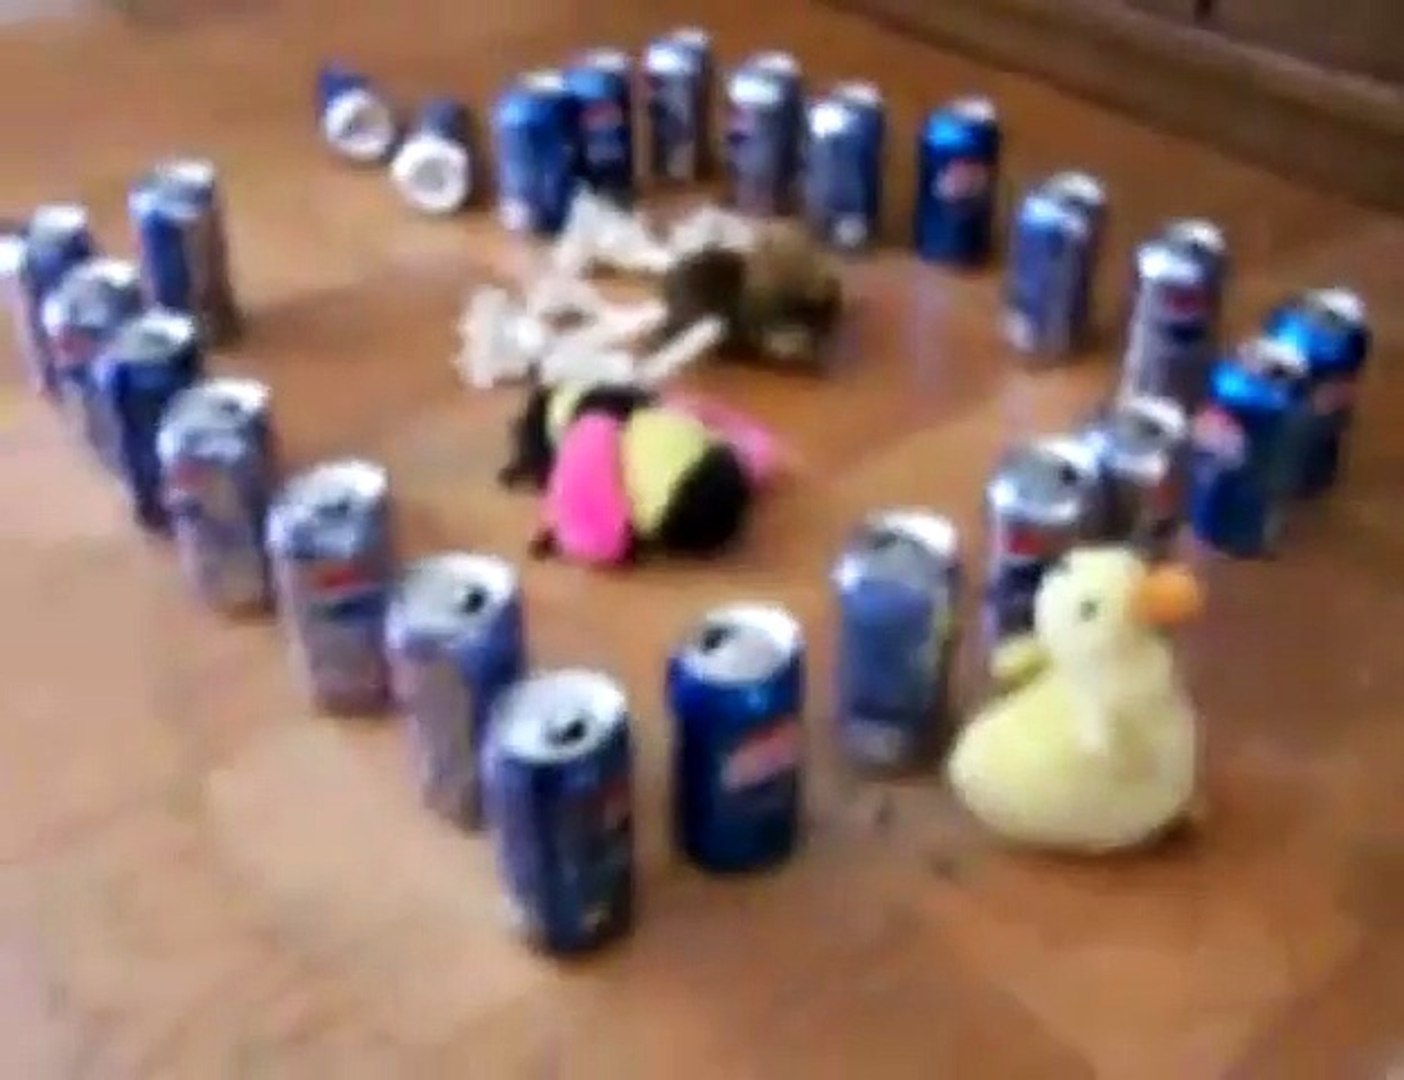 Shih Tzu barricaded with soft drink cans (version Benji)